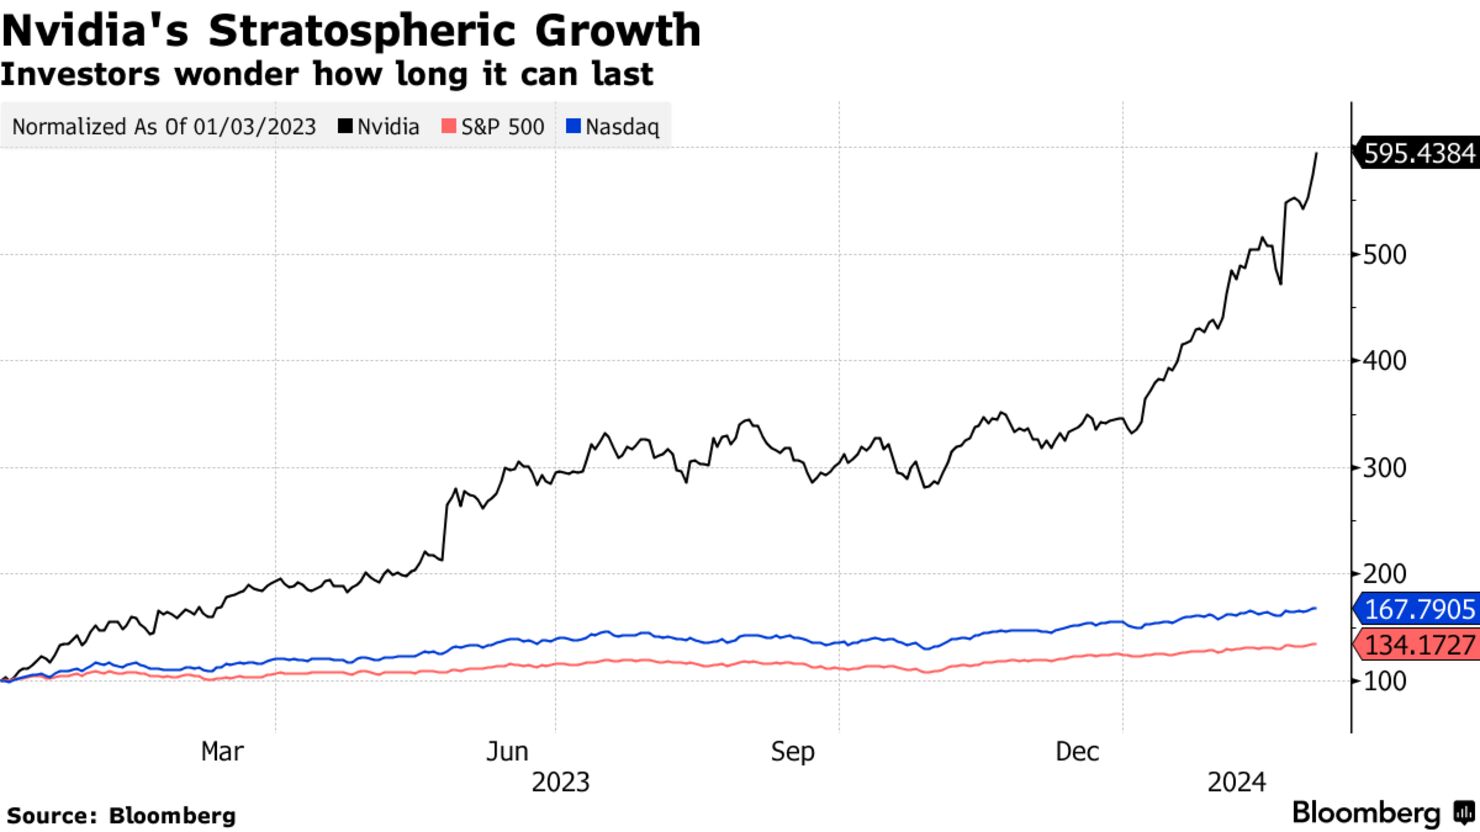 Nvidia's Stratospheric Growth | Investors wonder how long it can last